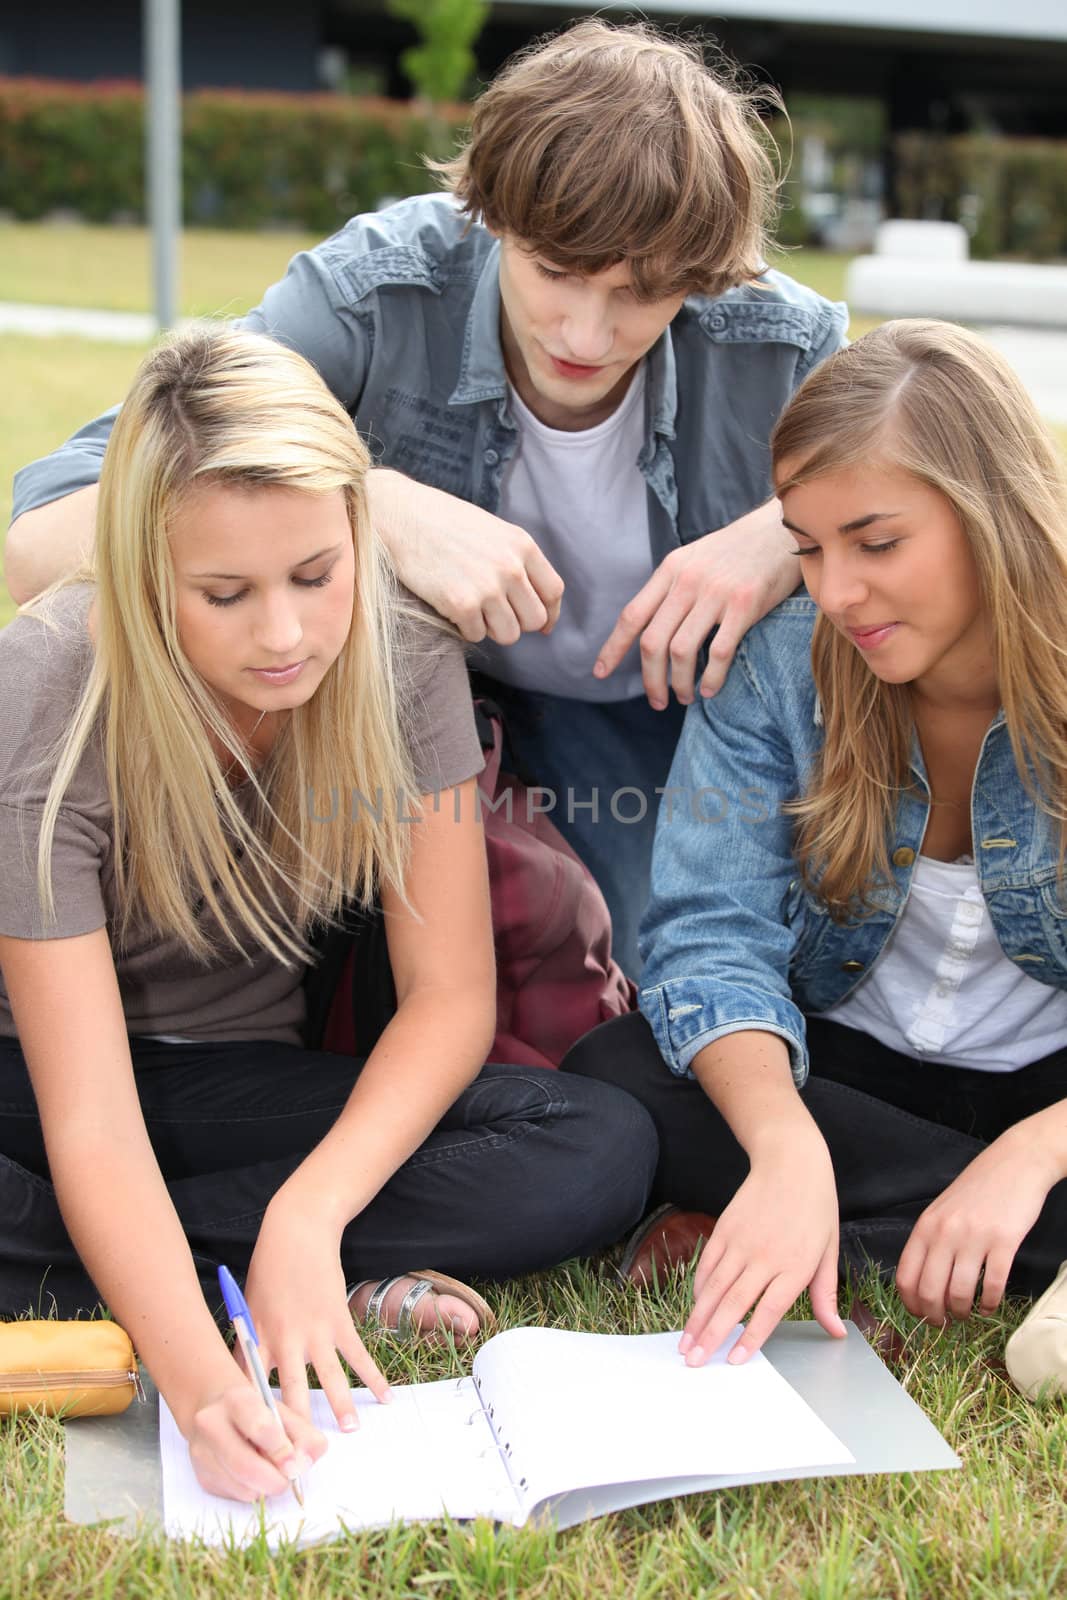 Three students working together in a park by phovoir